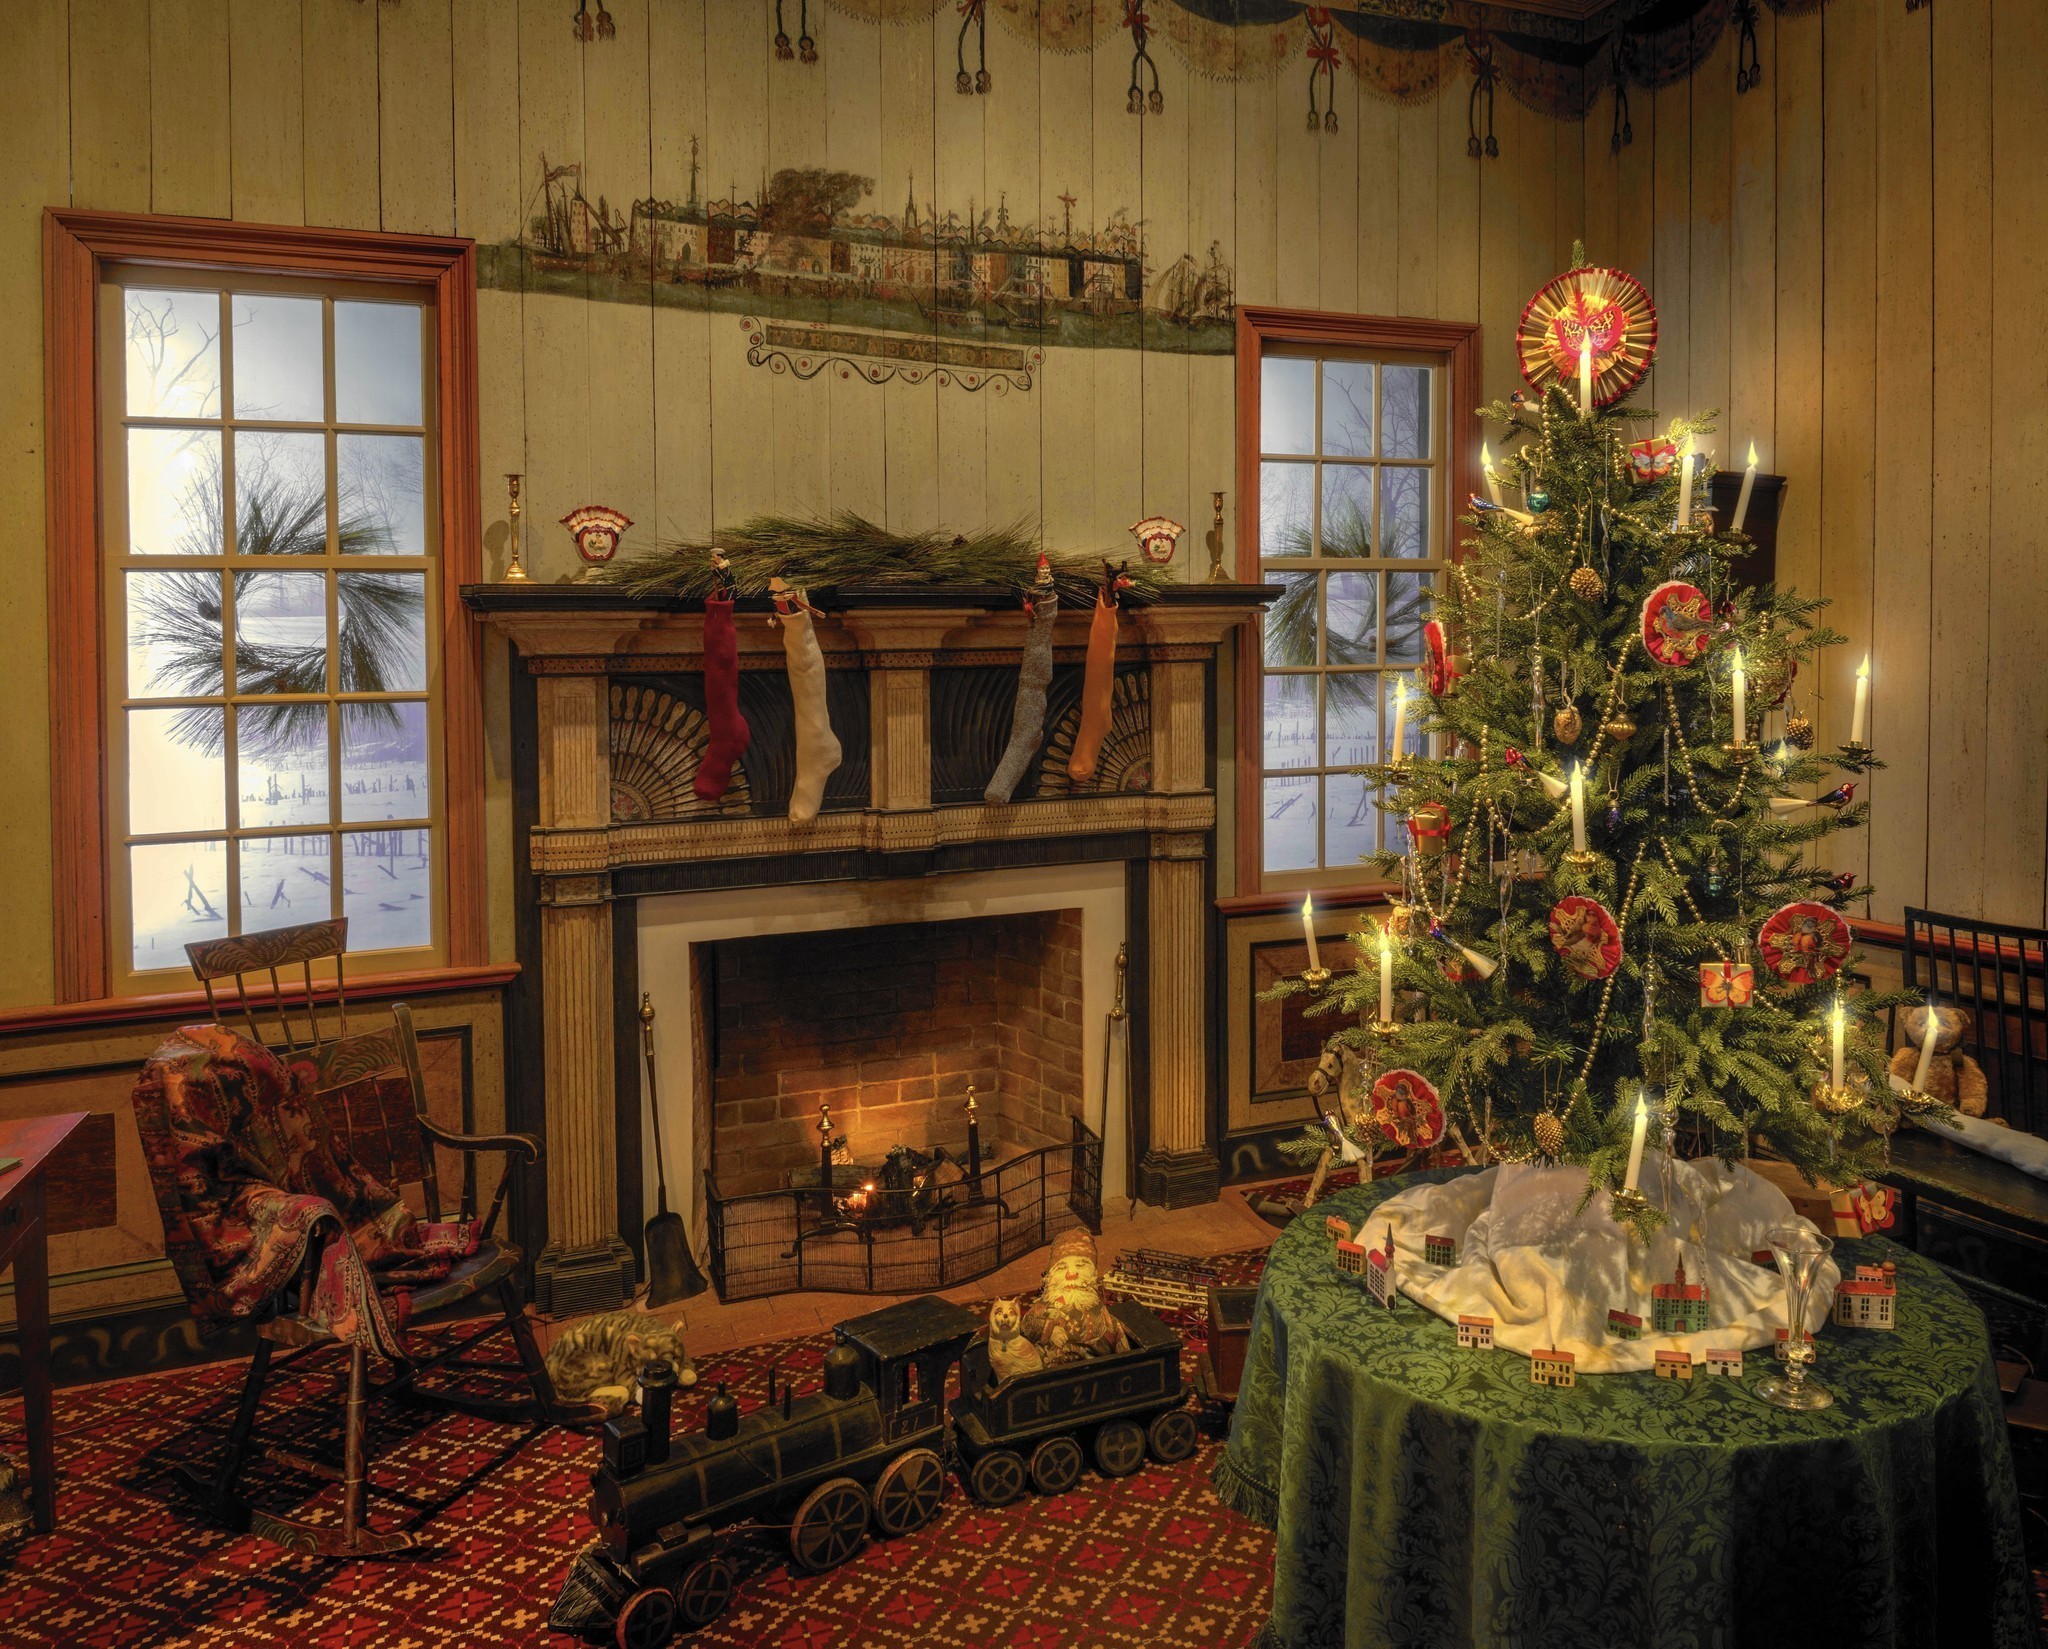 Colonial Williamsburg Christmas exhibit recalls the holiday's 19th ...